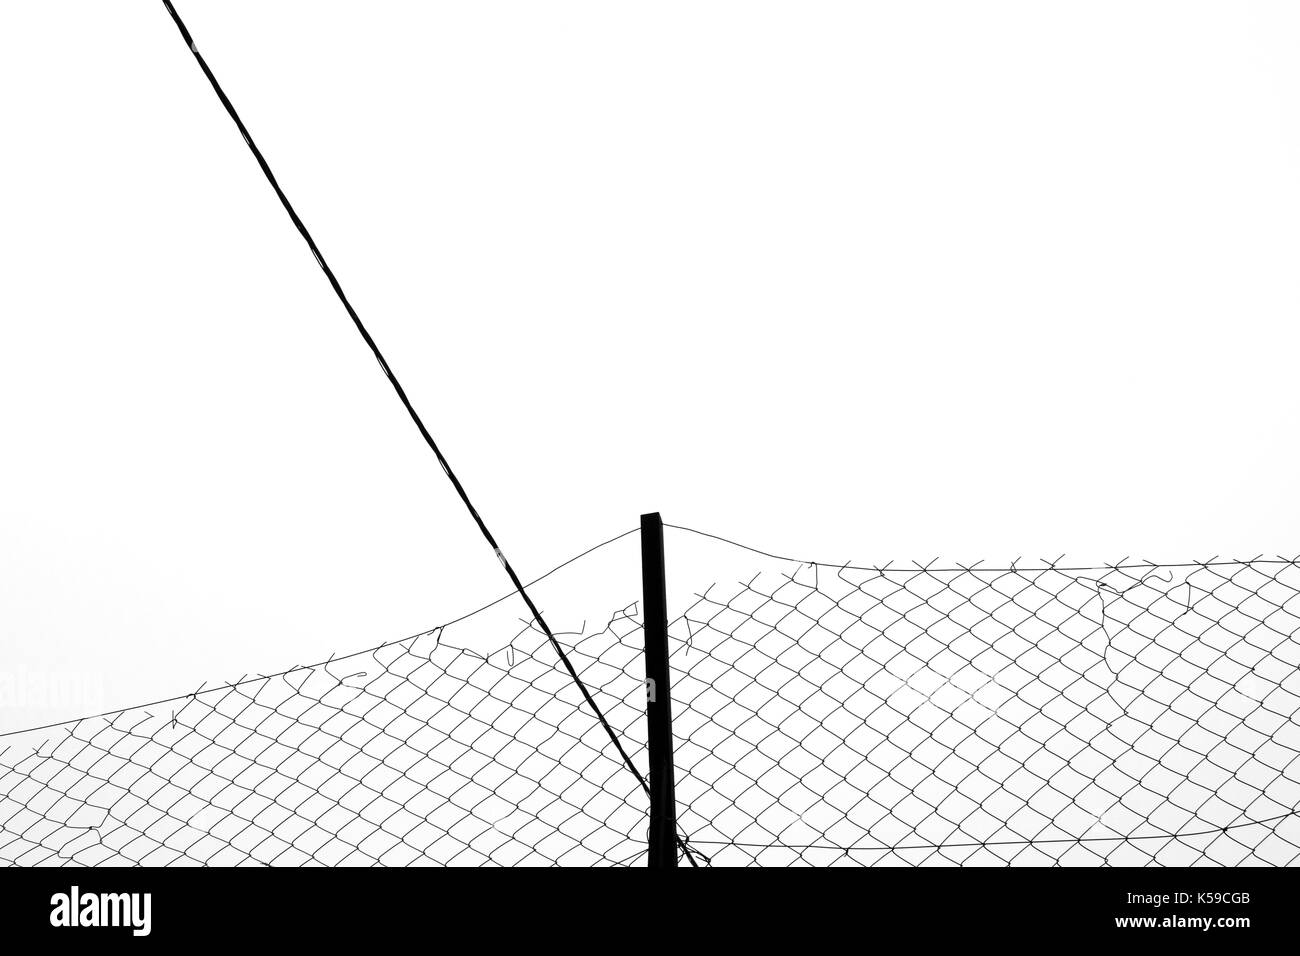 Rusty chain link fence silhouette and cable abstract background. Black and white. Stock Photo